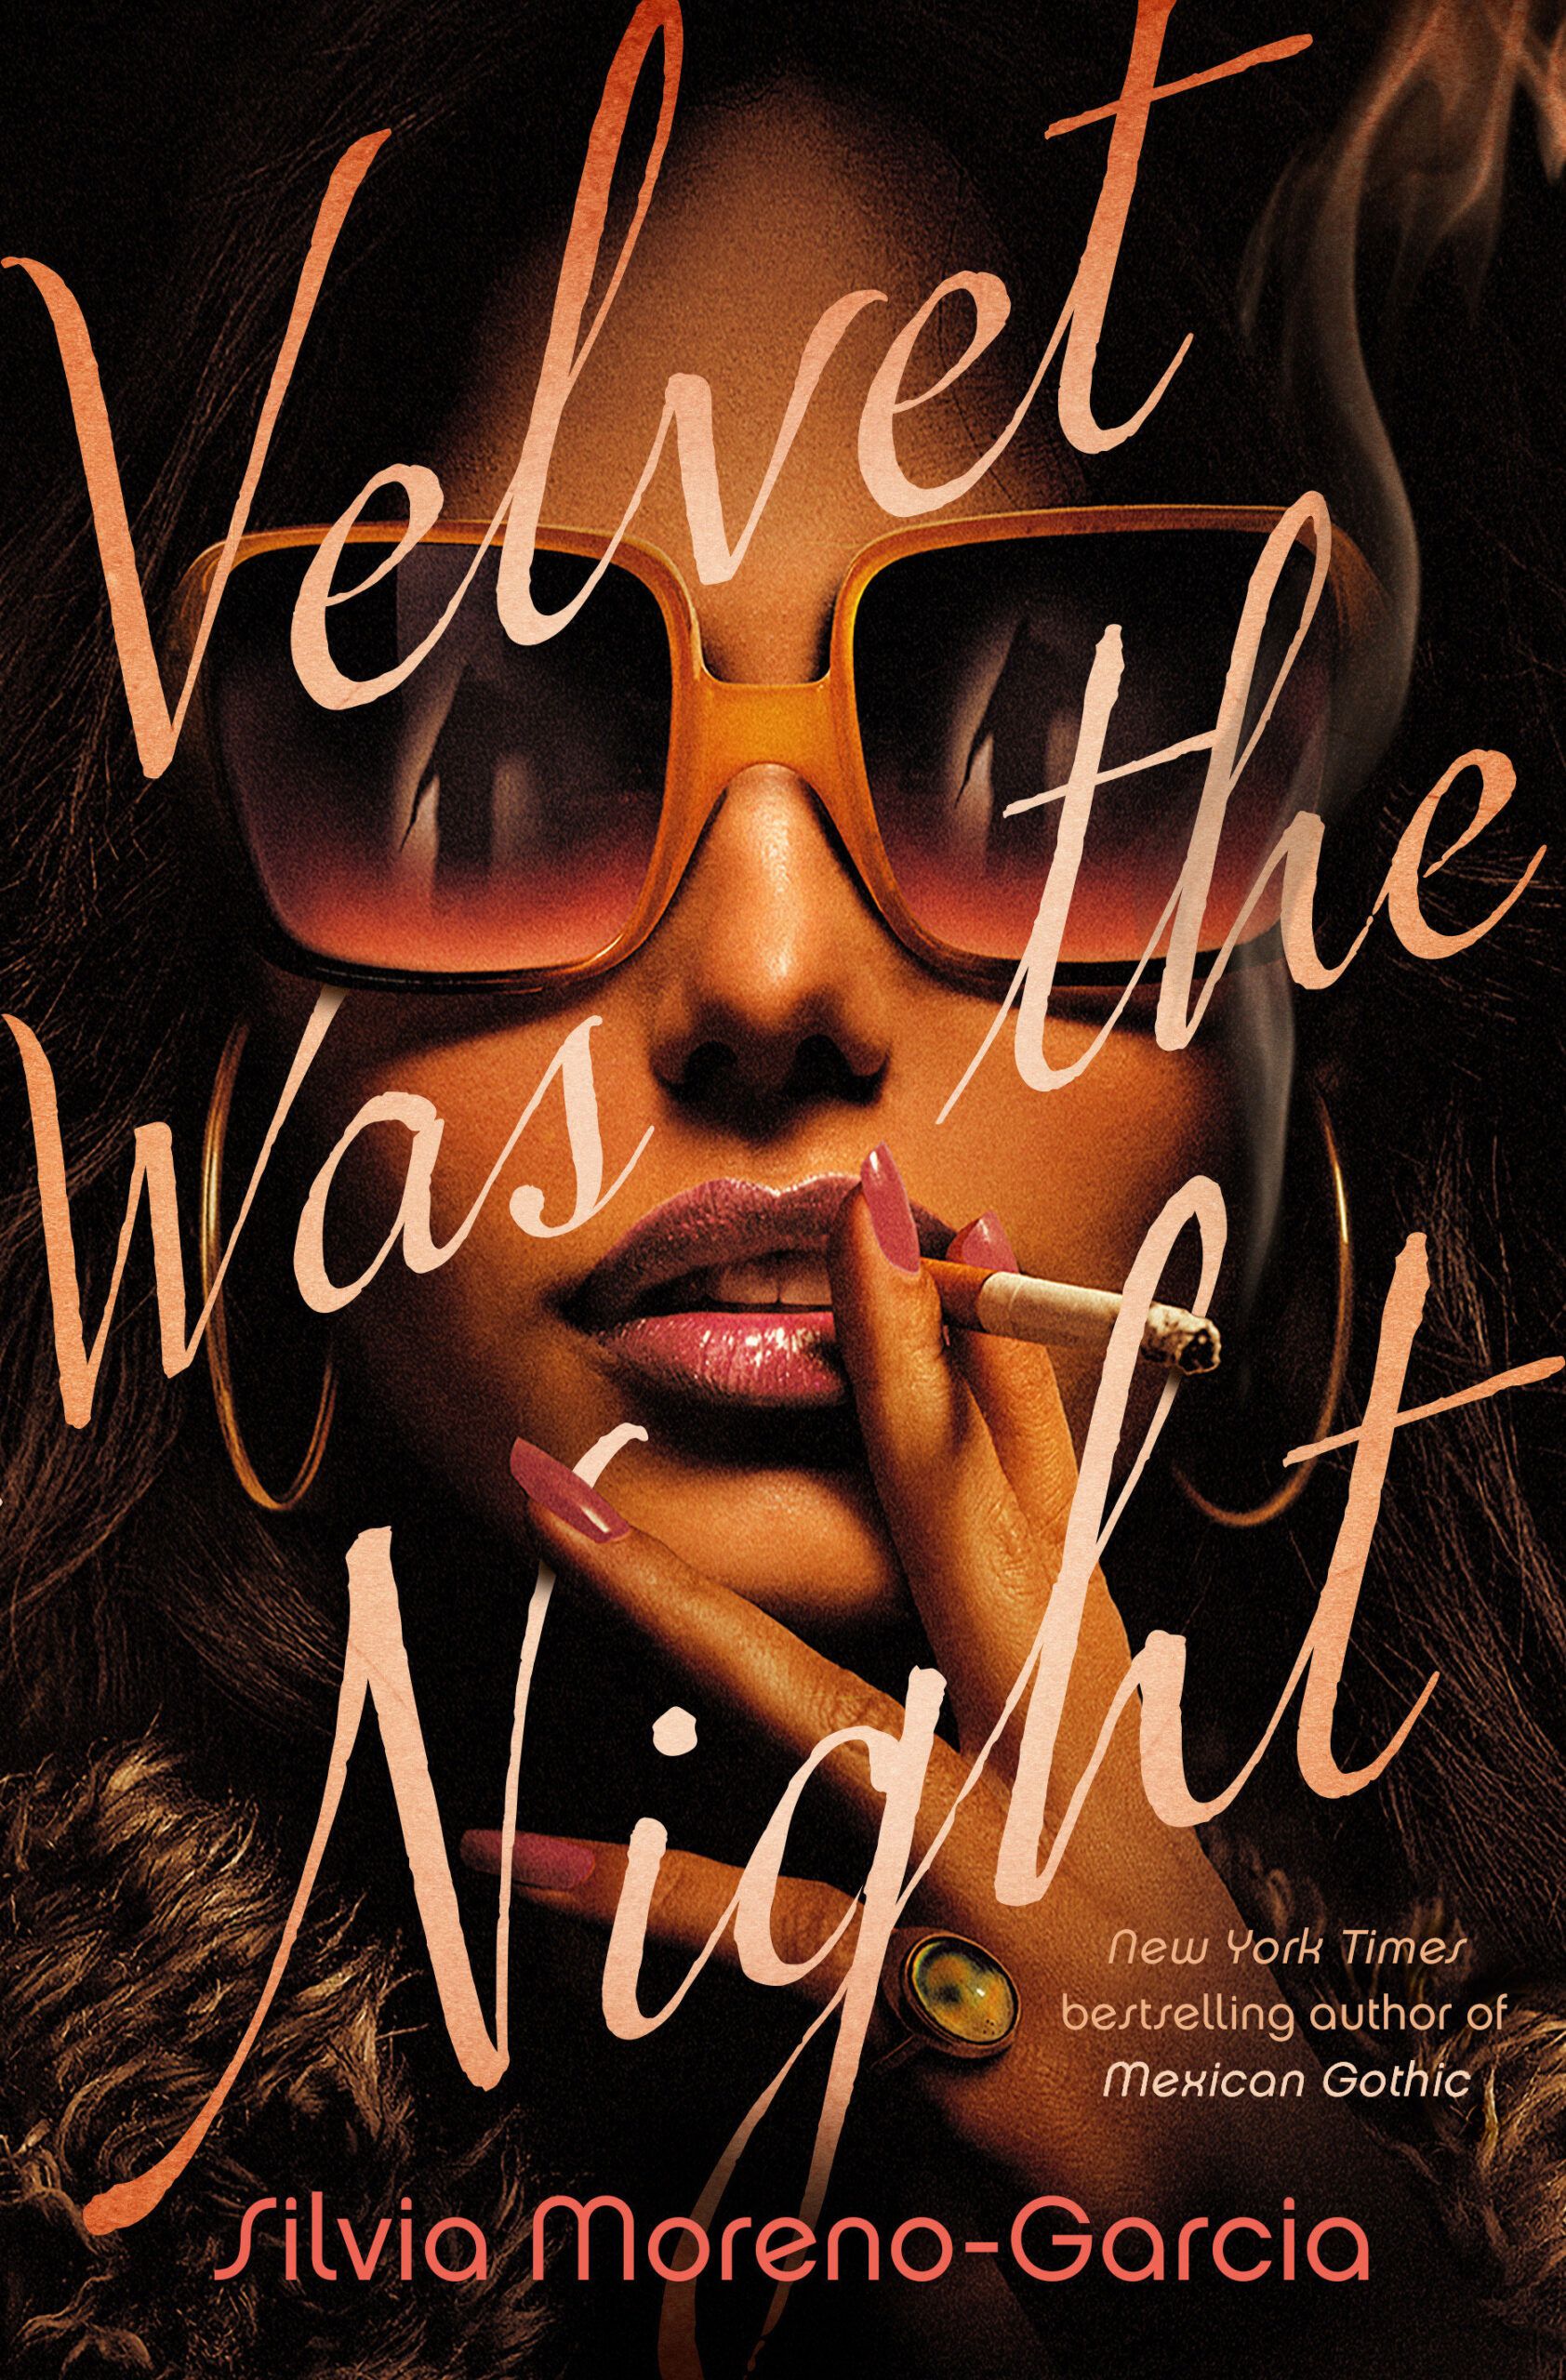 cover image of Velvet was the Night by Silvia Moreno Garcia